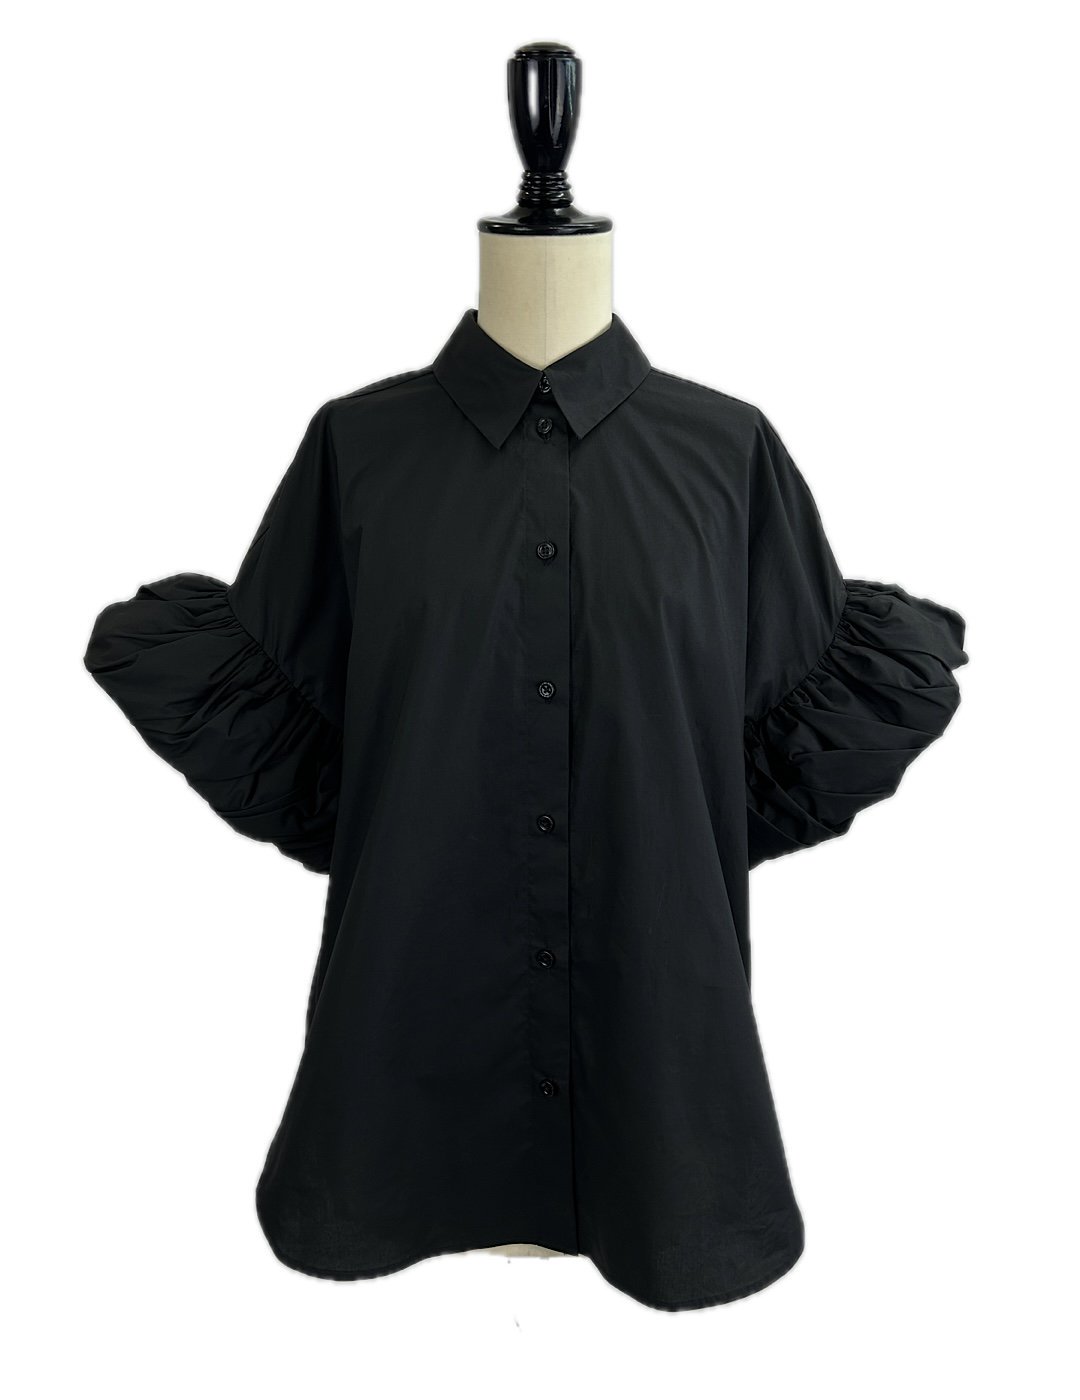 <img class='new_mark_img1' src='https://img.shop-pro.jp/img/new/icons47.gif' style='border:none;display:inline;margin:0px;padding:0px;width:auto;' />MEIMEIJ / POINT SLEEVE BLOUSE